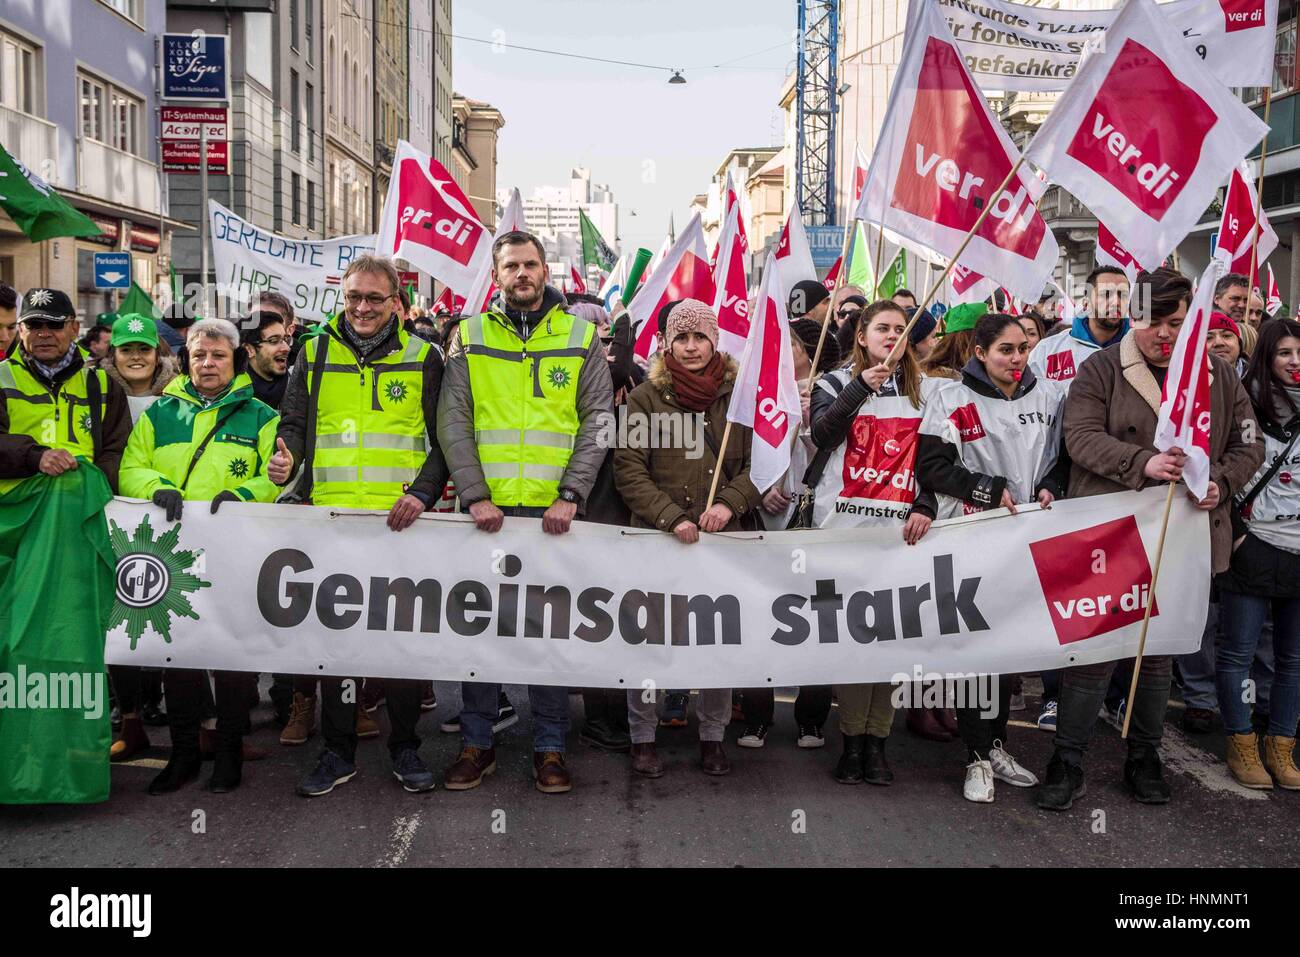 Munich, Germany. 14th Feb, 2017. The Ver.di and police unions called for a warning strike today in Munich in a series of strikes in Germany. Included in the strike are workers of the TU and LMU universities, Deutsches Museum, courts, hospitals, Bayerische Staatsoper, Bayerisches Schauspiel, and others including highway workers. The demonstration start was at the Gewerkschaftshaus on Schwanthalerstrasse and ended at the famed Geschwister-Scholl-Platz at the LMU university. Credit: ZUMA Press, Inc./Alamy Live News Stock Photo